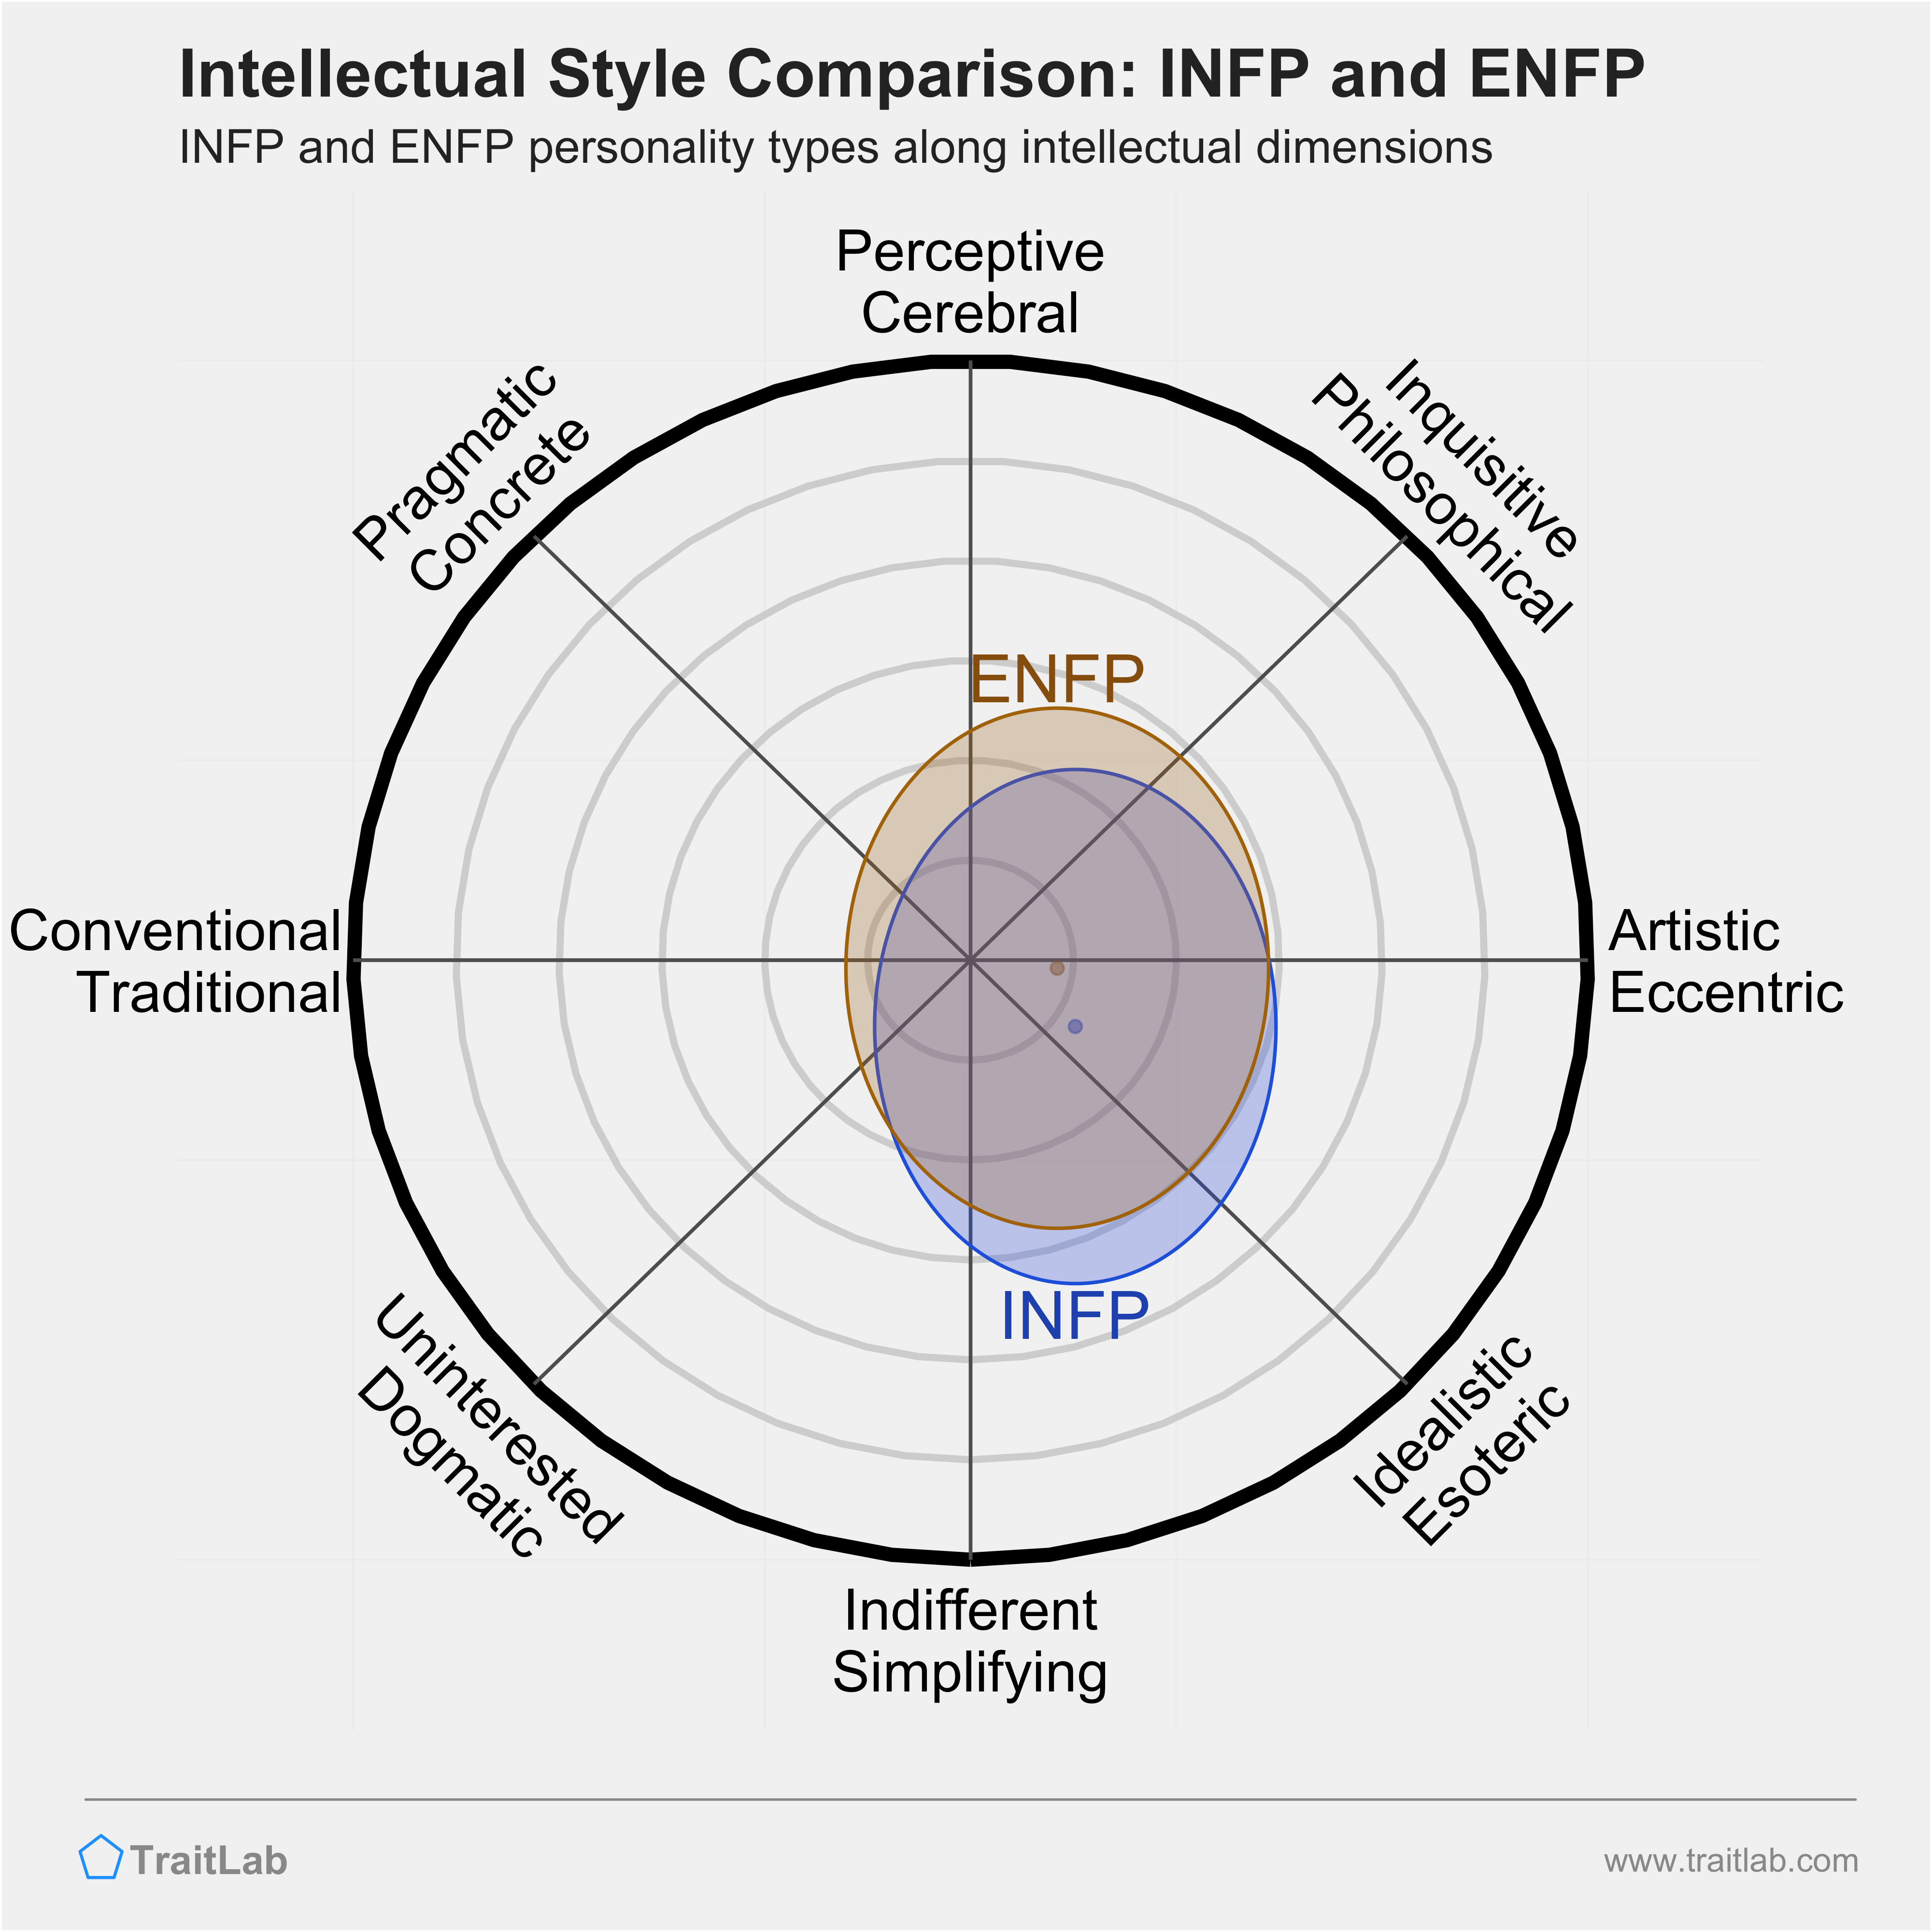 INFP and ENFP comparison across intellectual dimensions